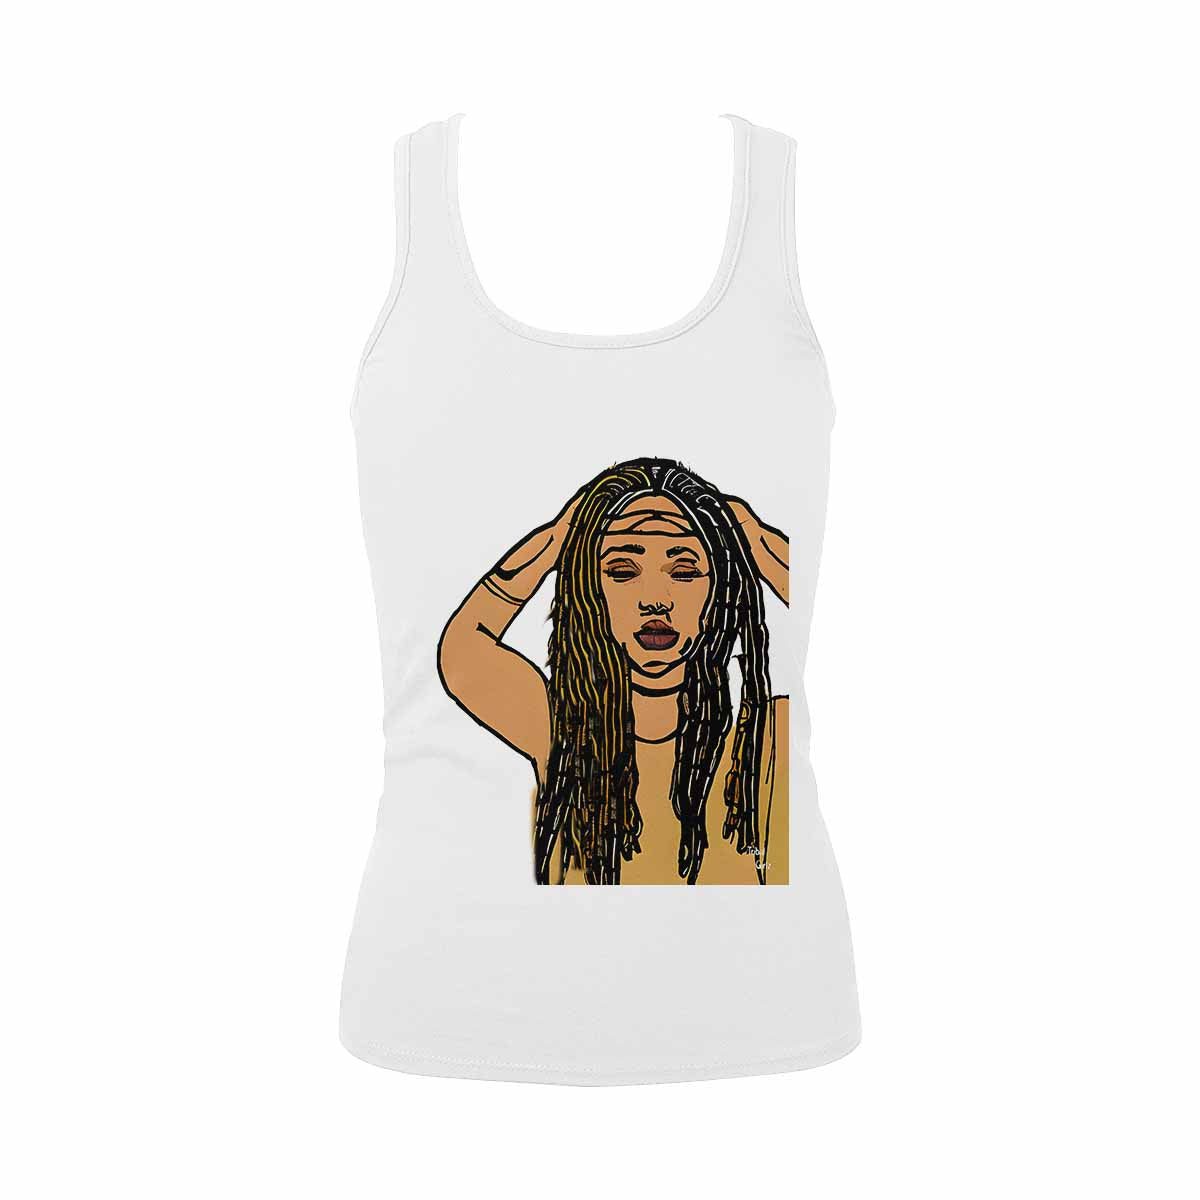 Dreads & Braids, WHITE tank top, cotton, african tribal, outline MCL, Fulangiara 24